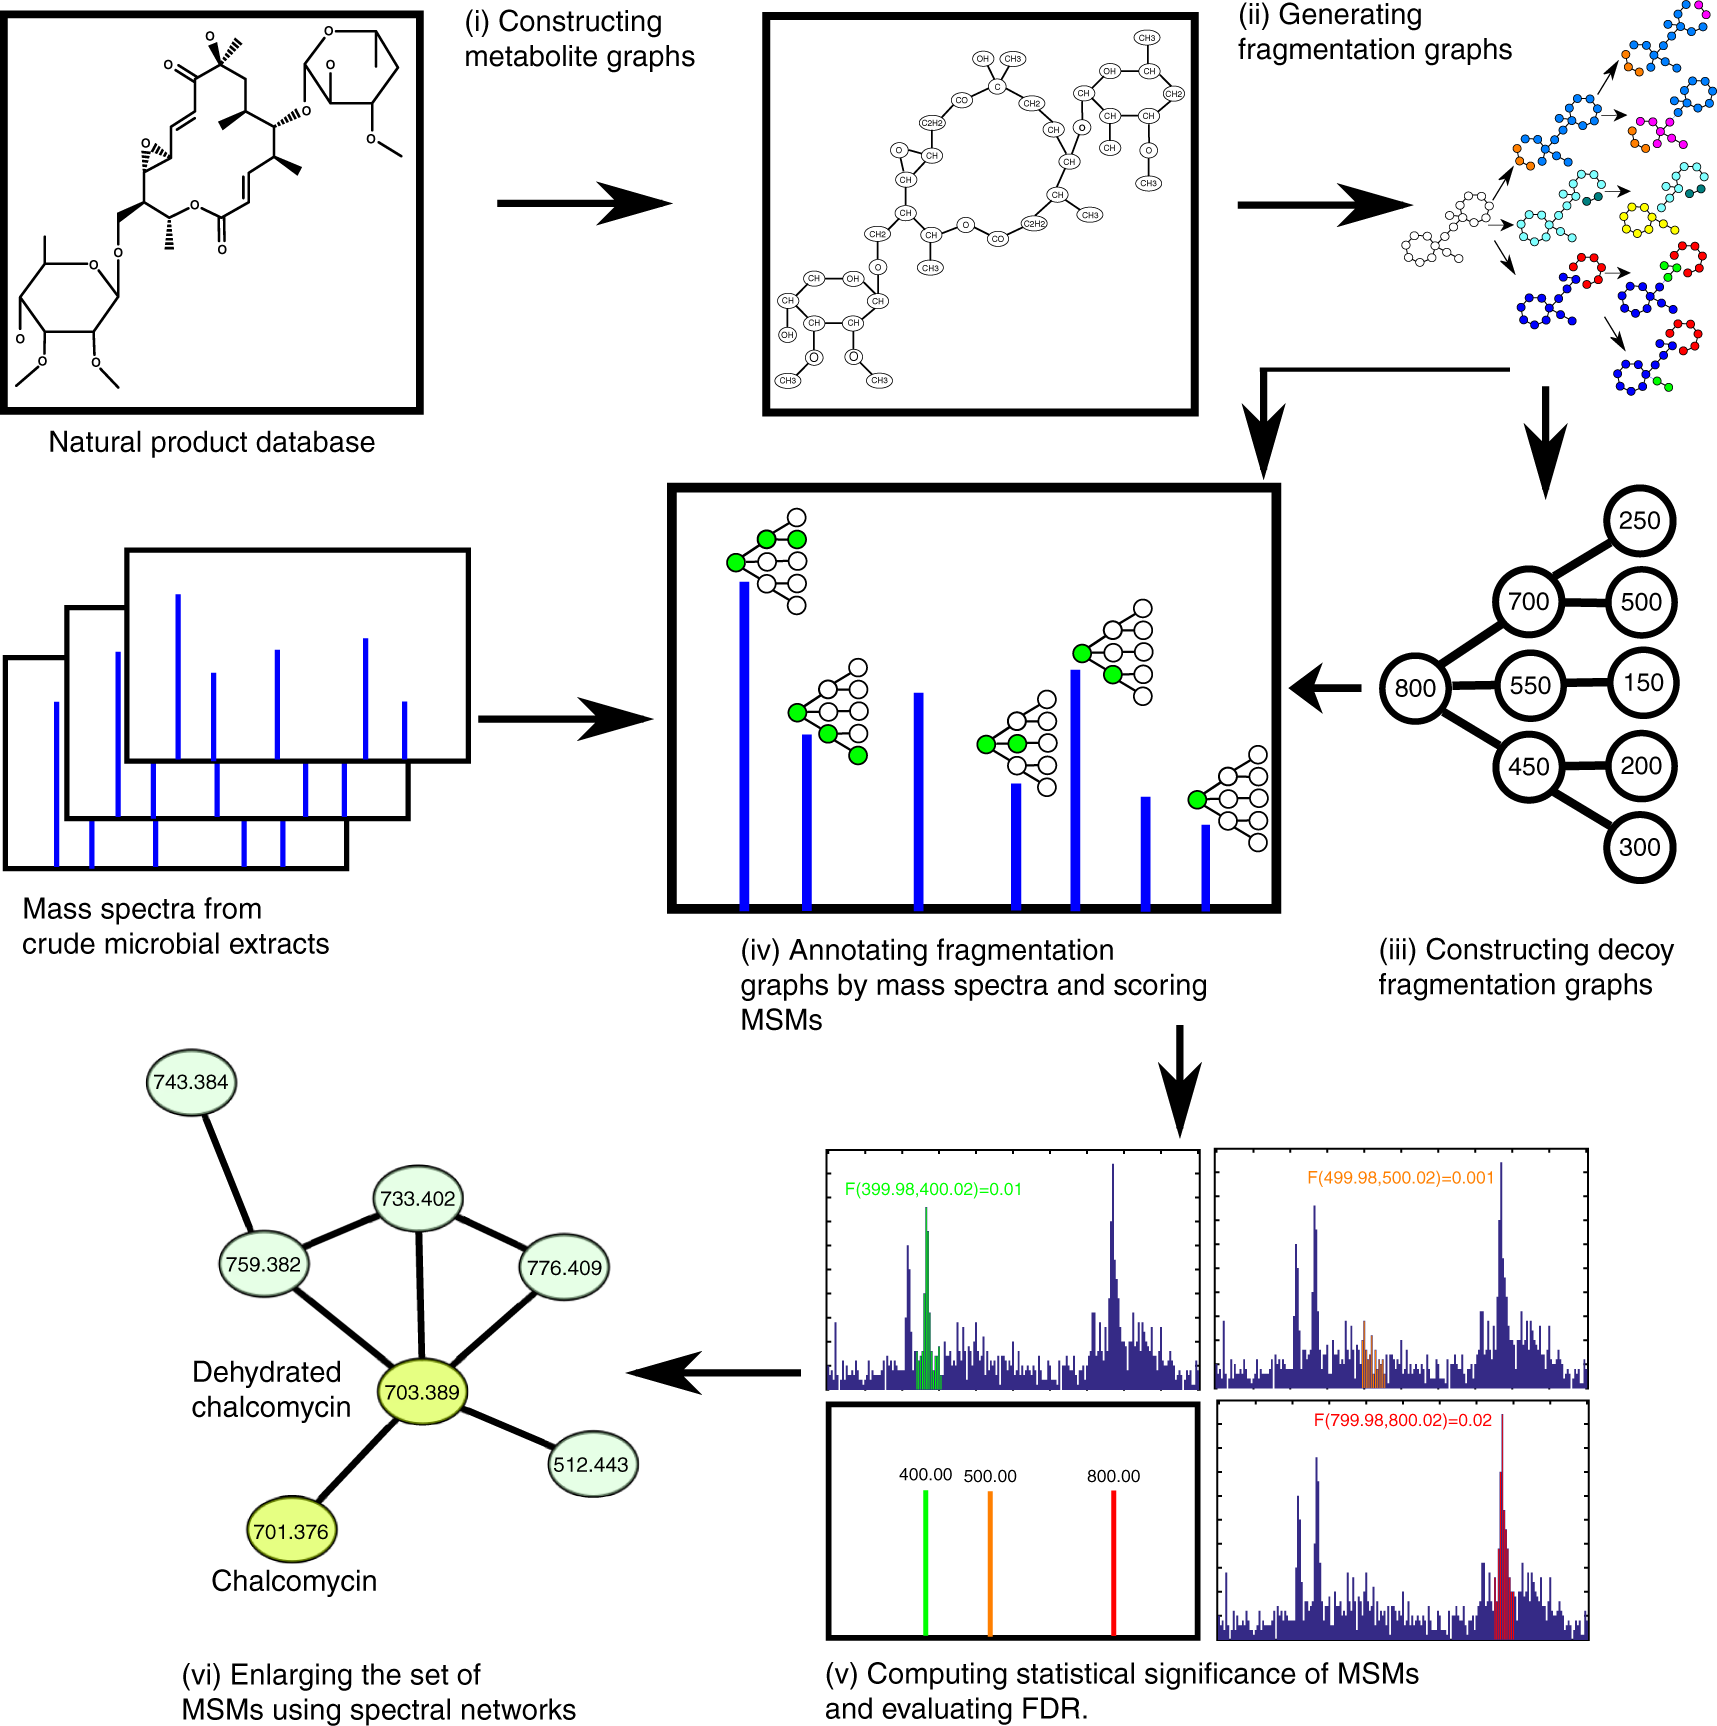 Applications of Mass Spectrometry to Organic Sterochemistry